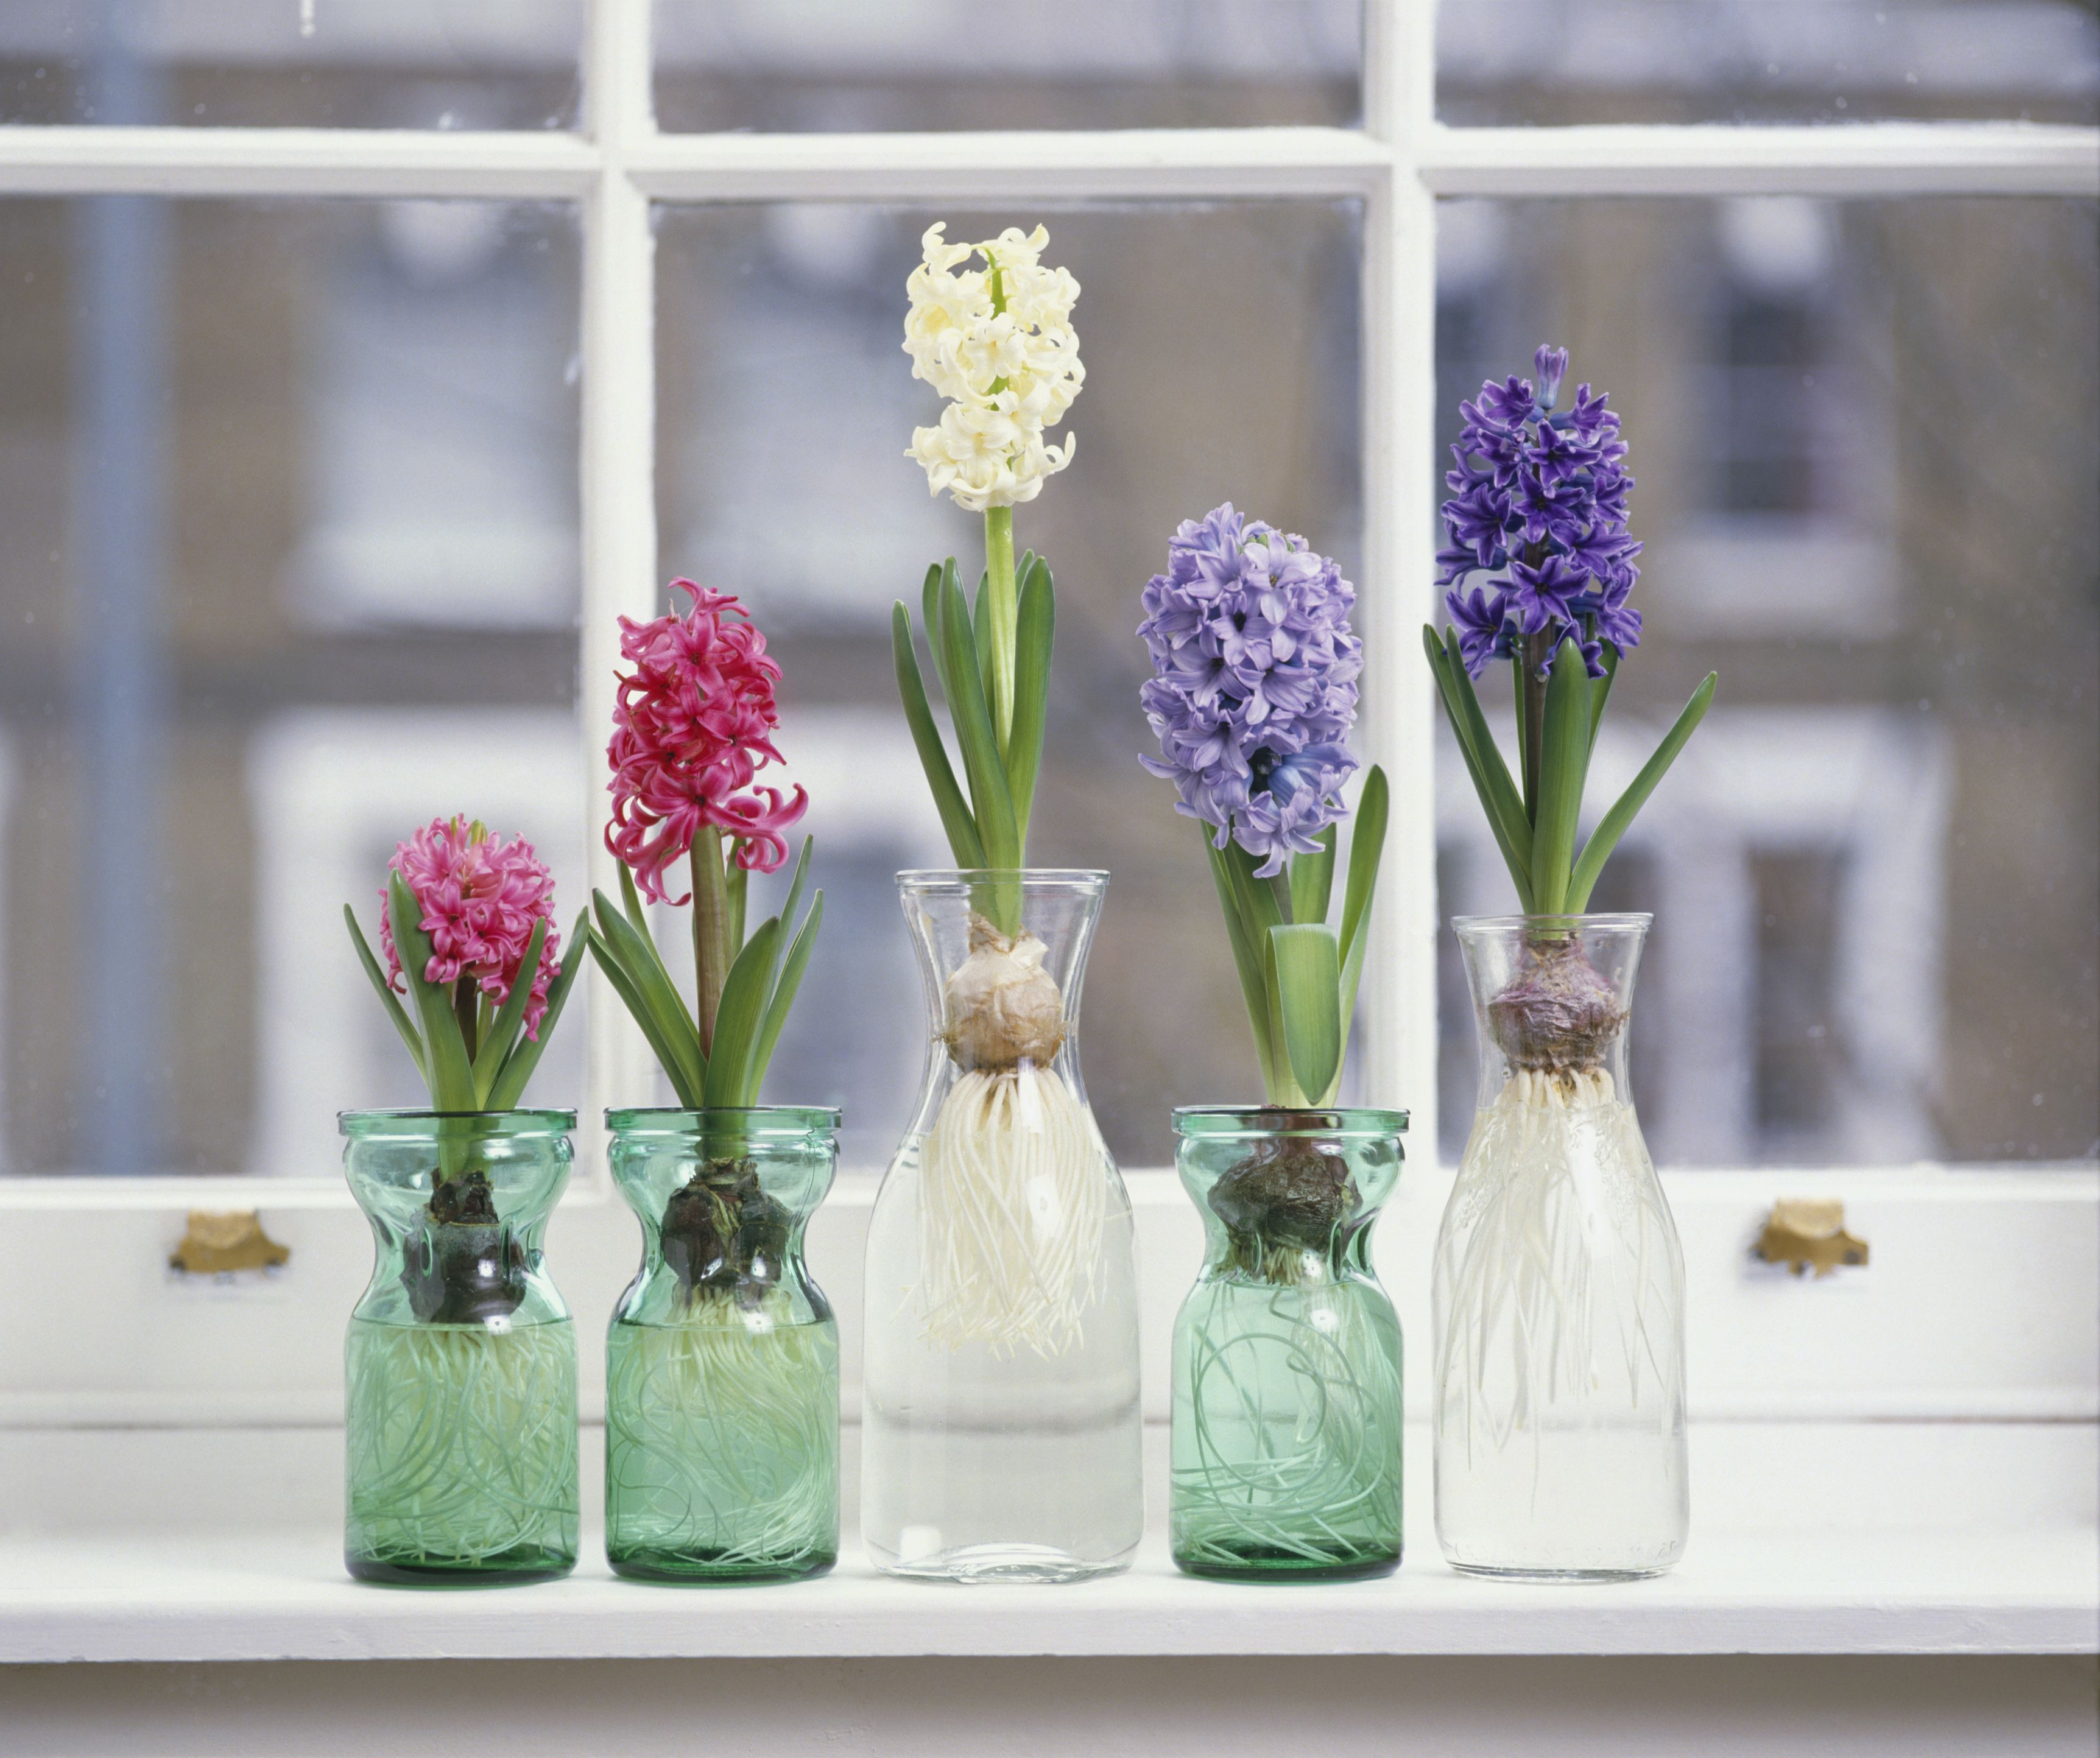 26 Great Light Bulb Vase Diy 2024 free download light bulb vase diy of how to grow hyacinth flowers indoors with regard to pink white and purple hyacinthus plants with bulbs in glass jars on window sill 125157739 57c5b8f73df78cc16ead76eb